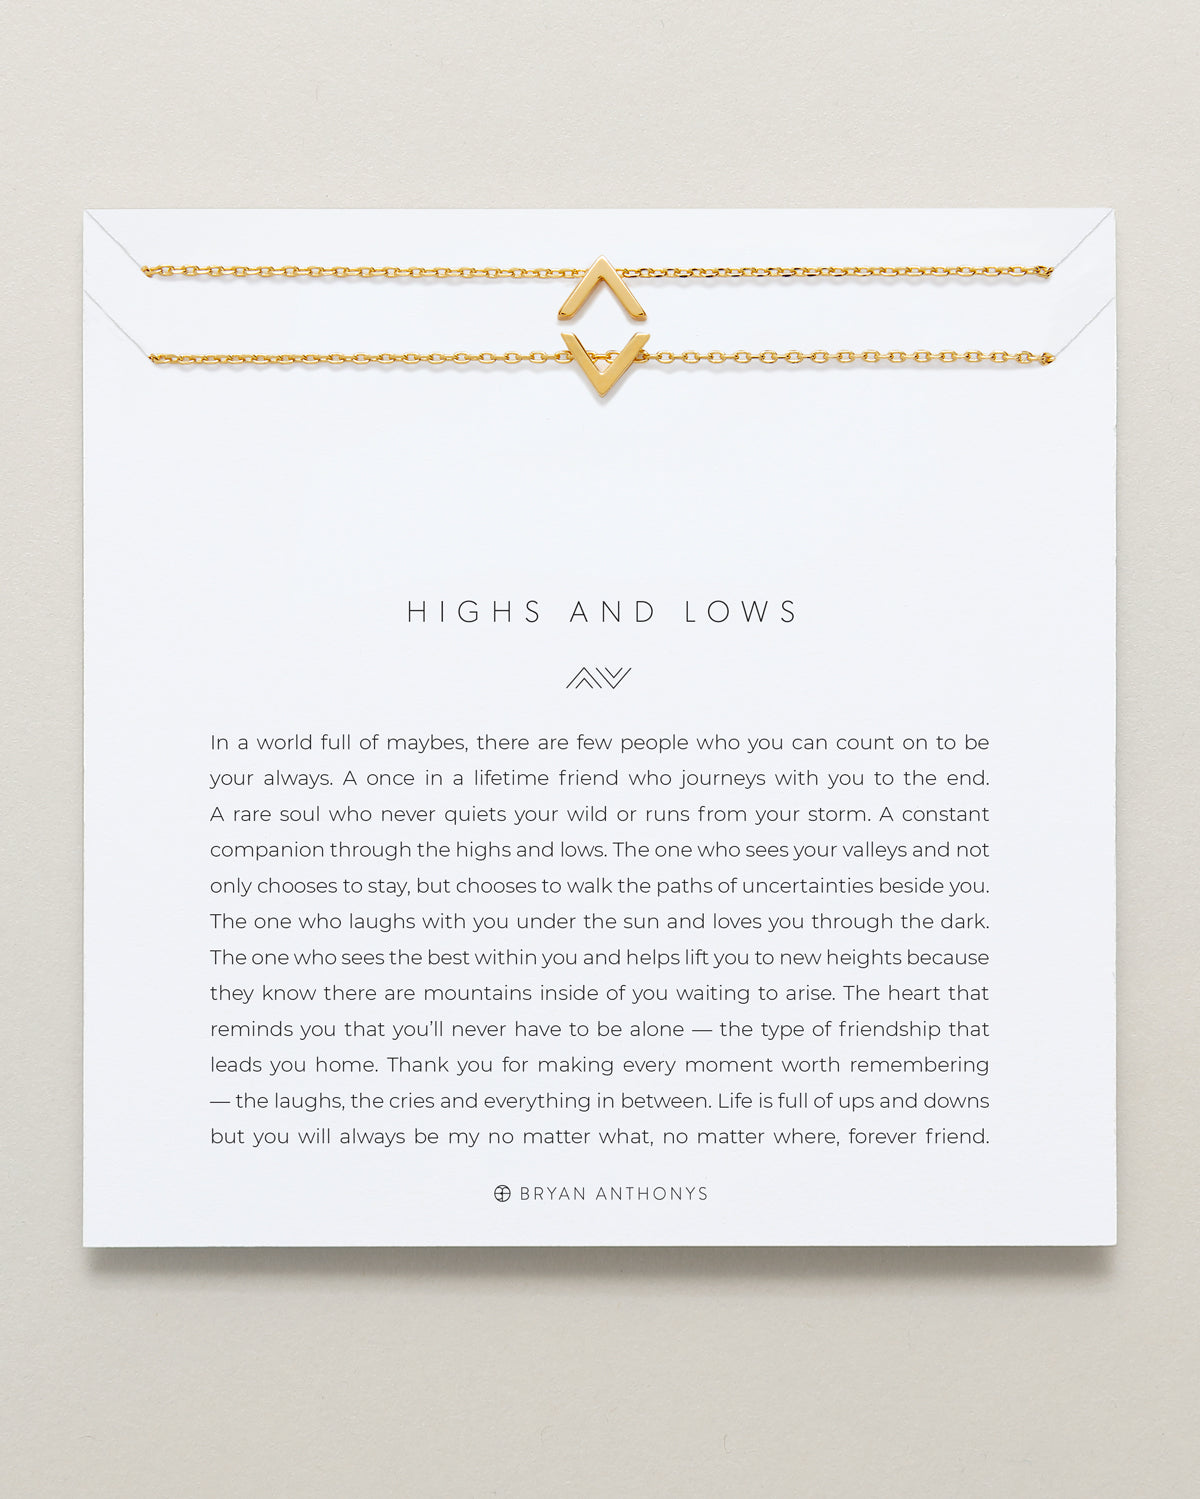 Bryan Anthonys Highs and Lows Gold Necklace Set On Card